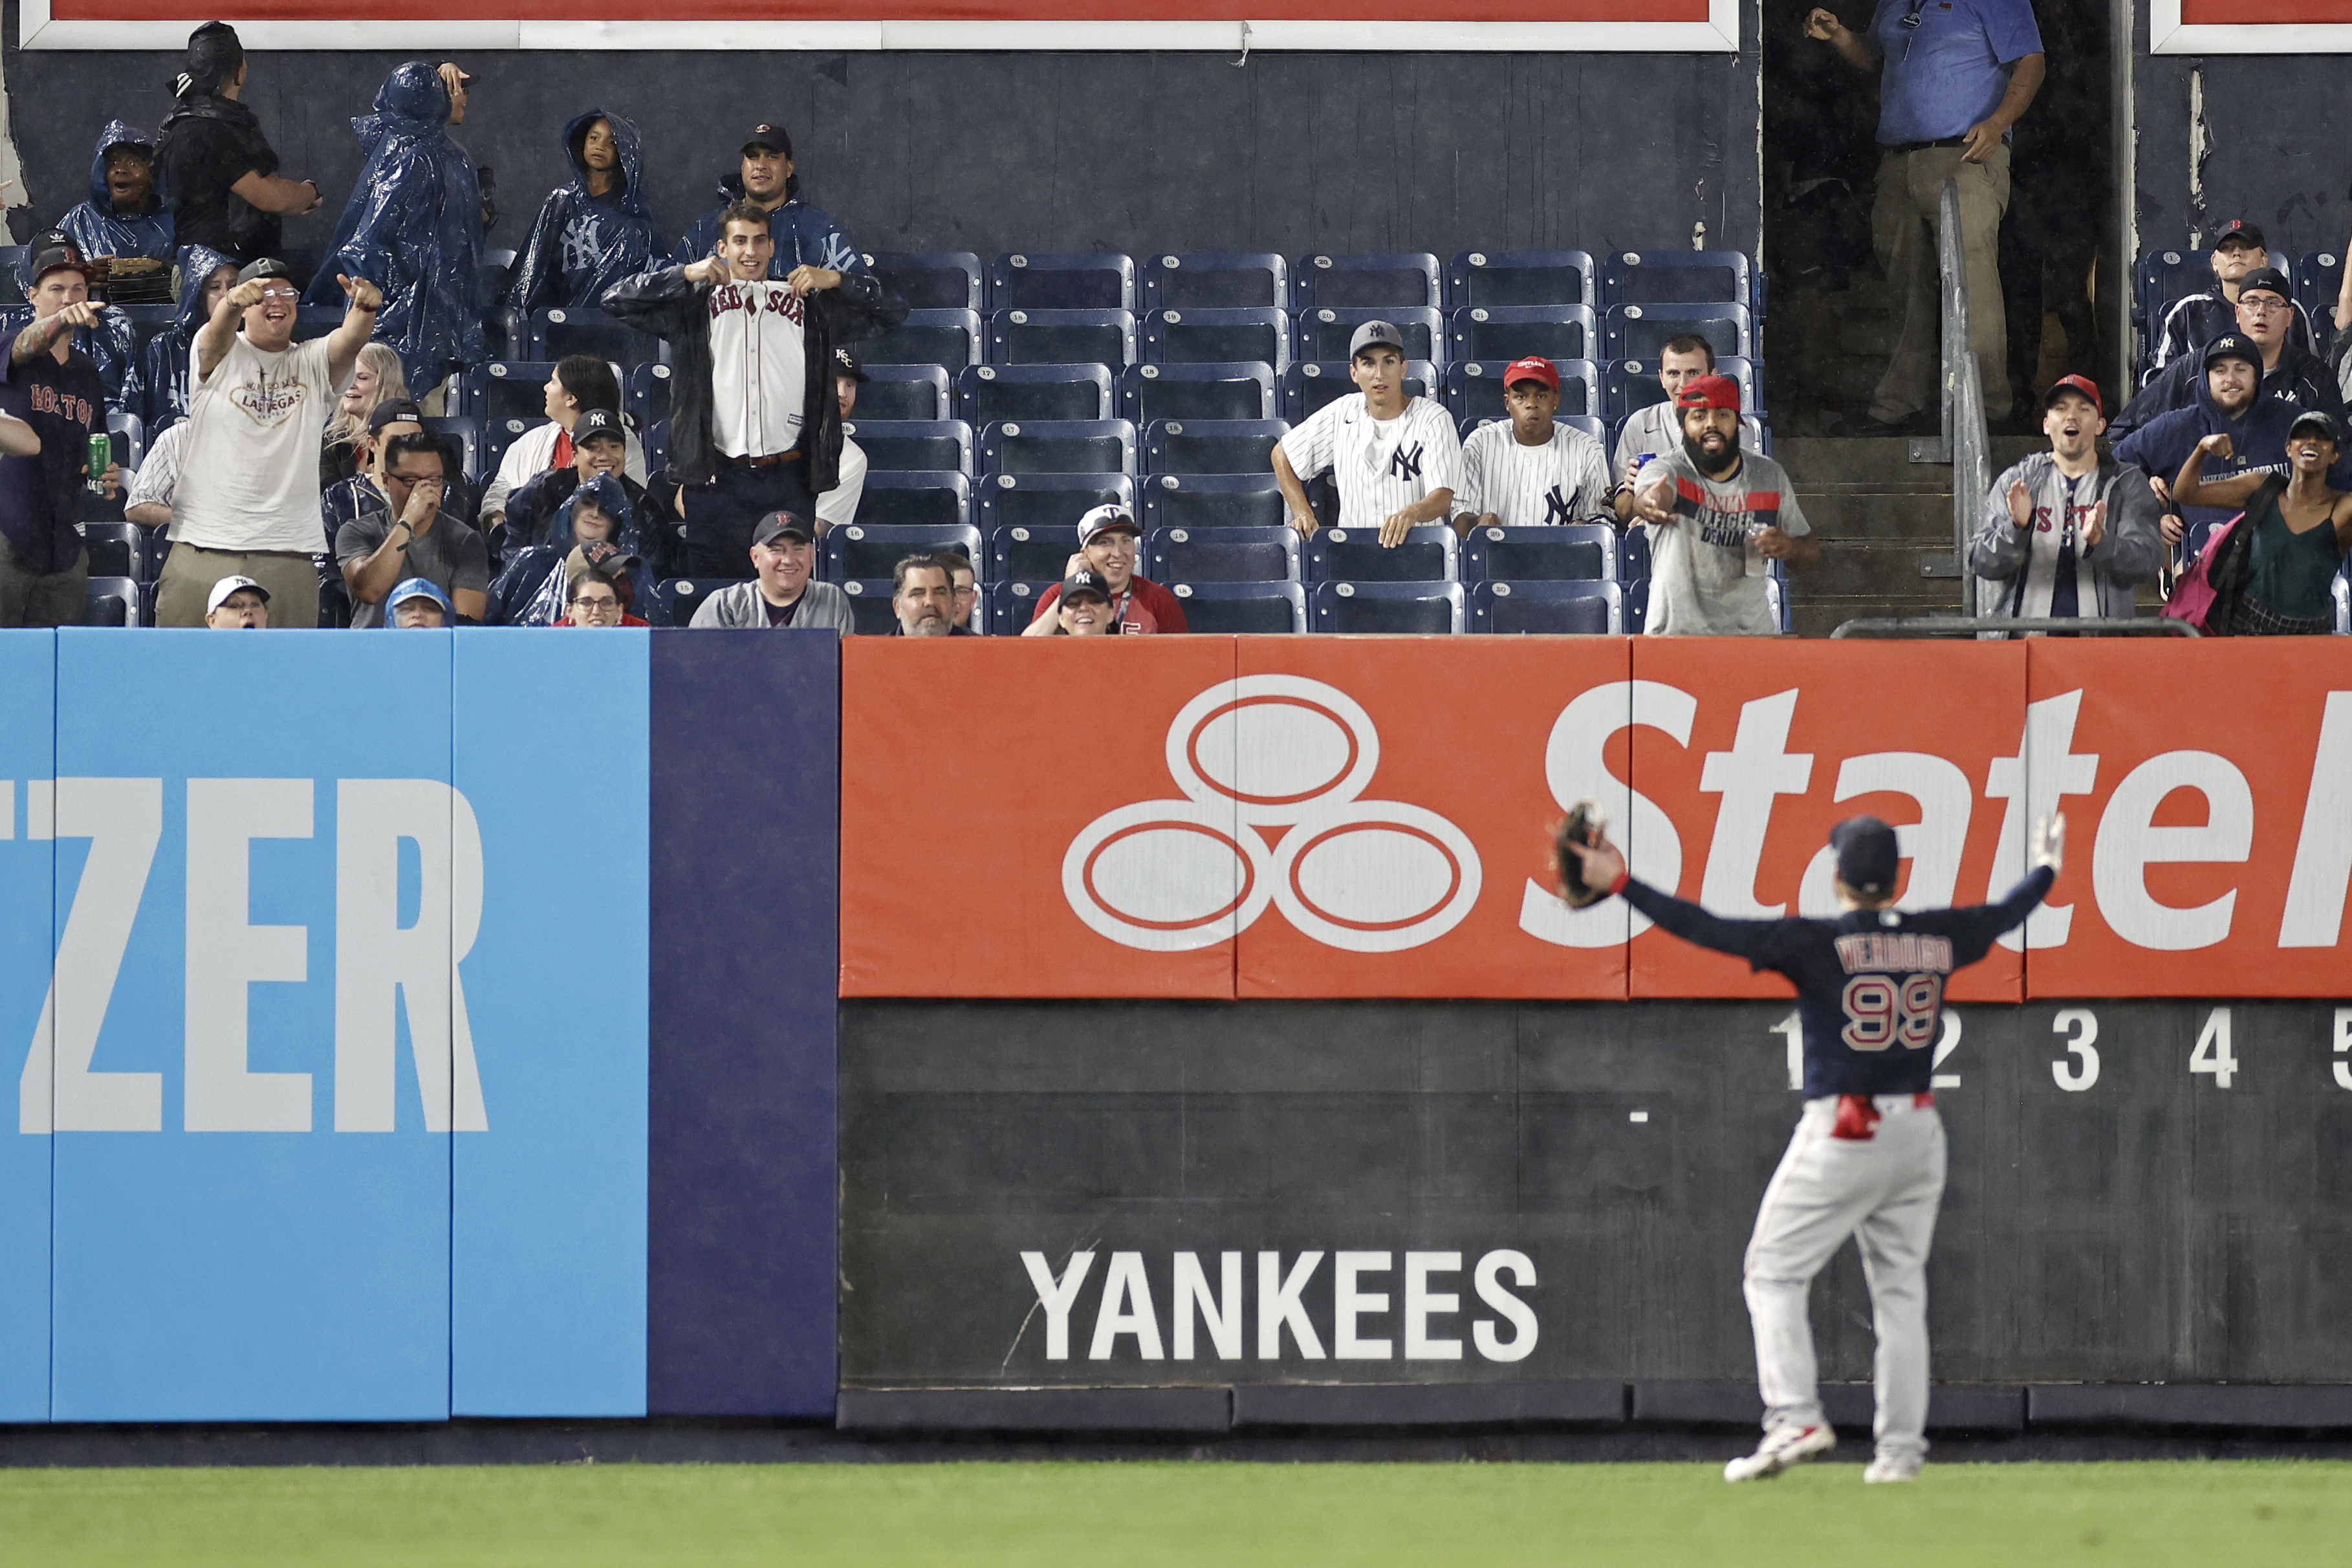 Yankees-Red Sox rivalry returns to the Bronx with drama looming